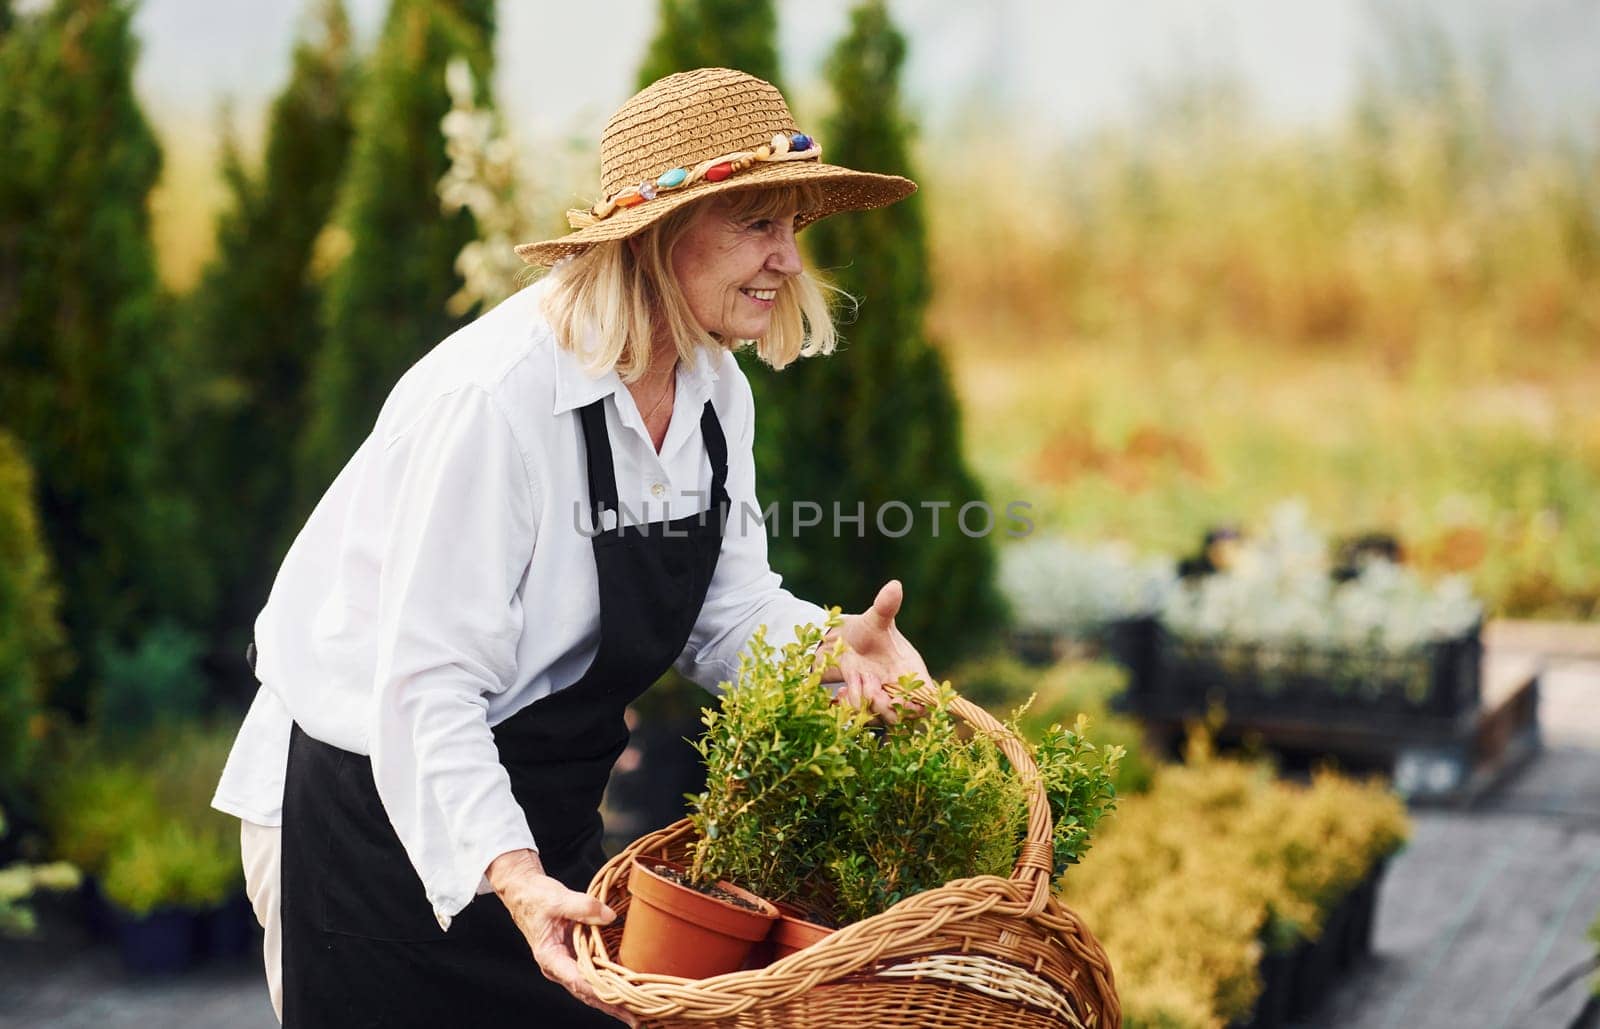 Taking plants in pots by using basket. Senior woman is in the garden at daytime. Conception of plants and seasons.